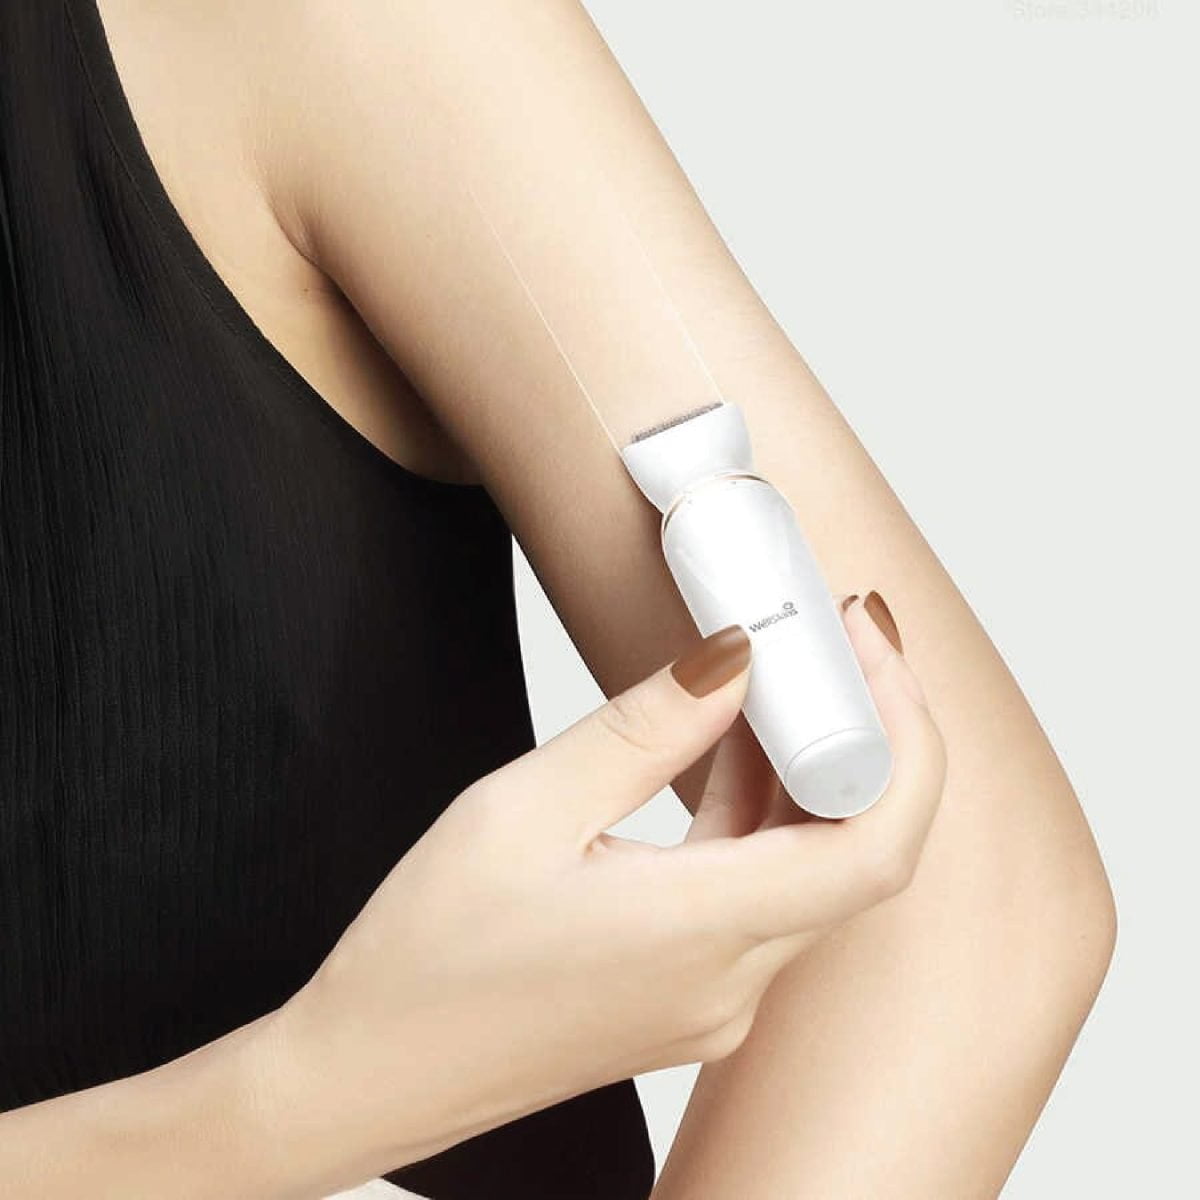 T3 04 Xiaomi Xiao Mi Youpin Wéllskins Electric Trimmer Repairer Shaver Body Hair Removal With Pivoting Head 30° Adjustable Cutter Head Hair Remover For Women Painless Lady Shaver 6-In-1 Https://Www.youtube.com/Watch?V=N-Wn12U3Uj4 Wéllskins Xiaomi Wellskins Wx-Tm01 Personal Beauty Trimmer